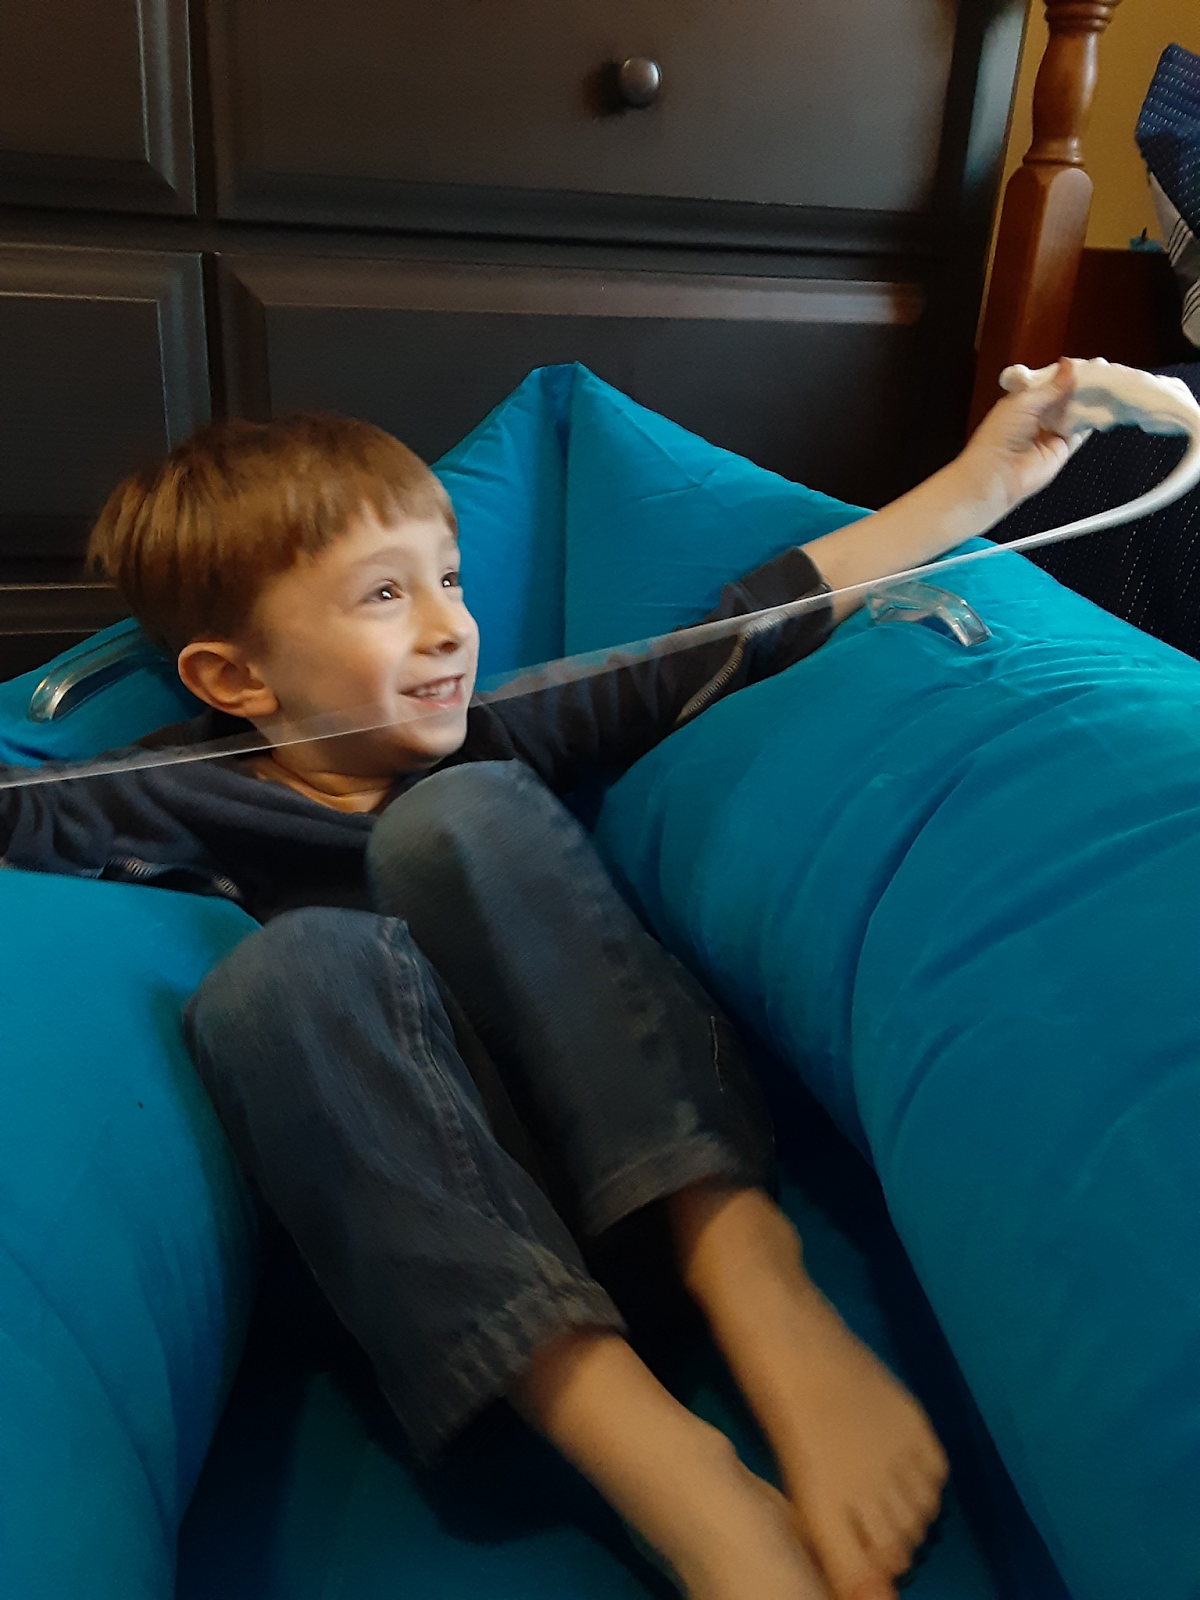 Product Review: Sensory Needs Therapy and Reading Lounger, Air Pump, and Repair Kit